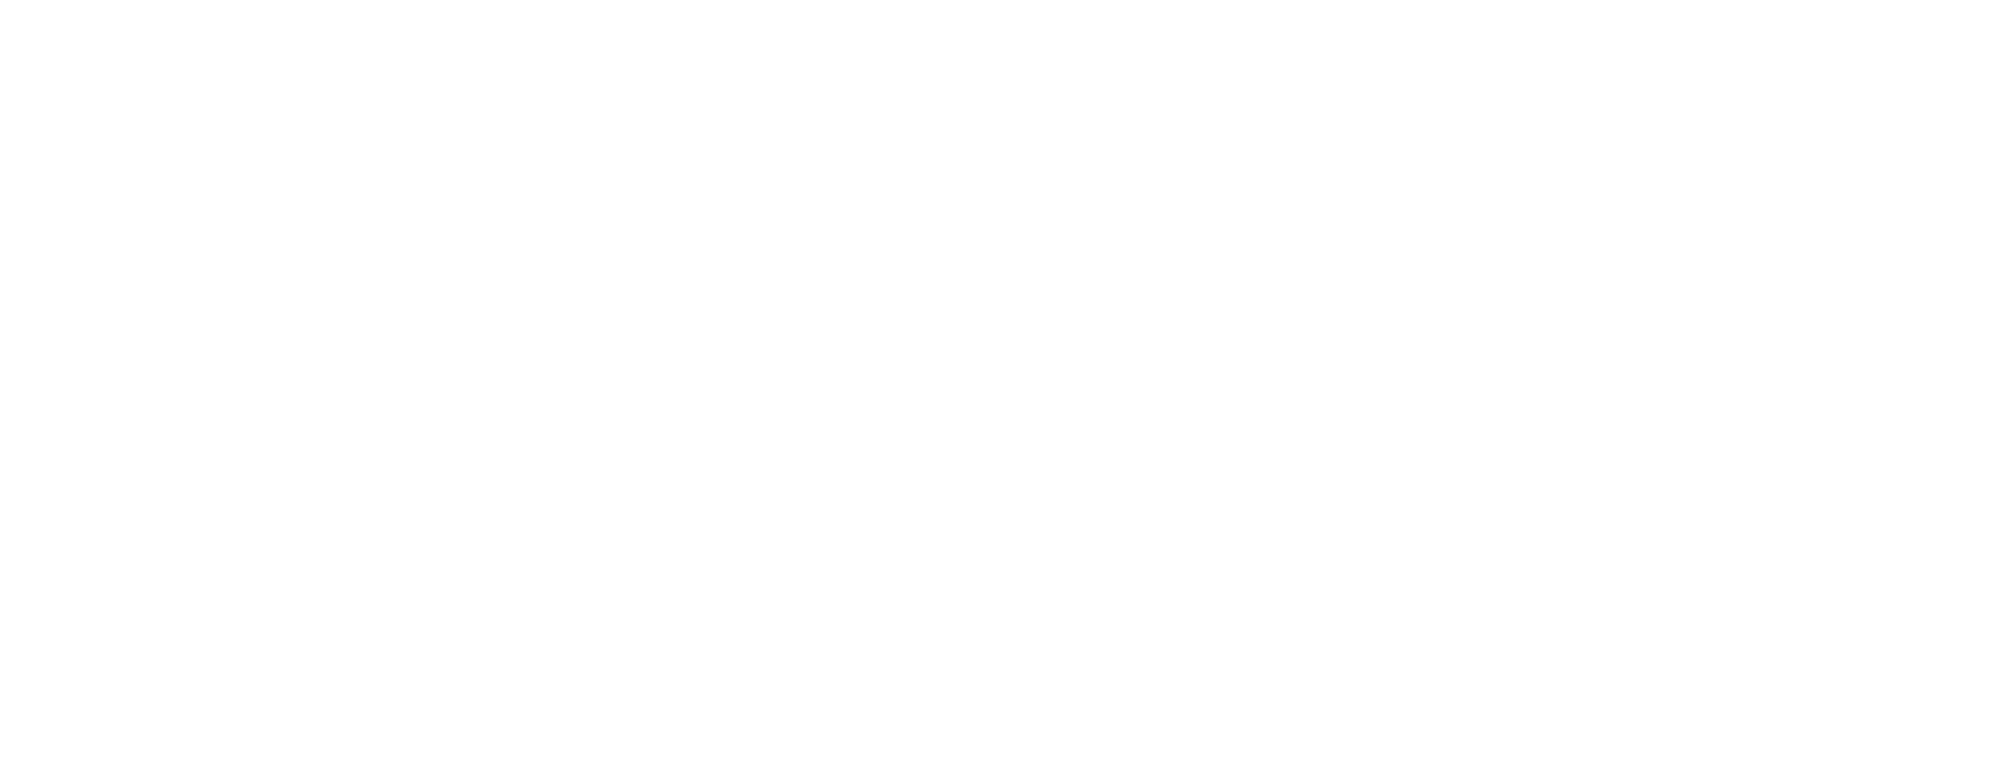 OpenFF Toolkit 0.15.1+0.gce45f35.dirty documentation logo